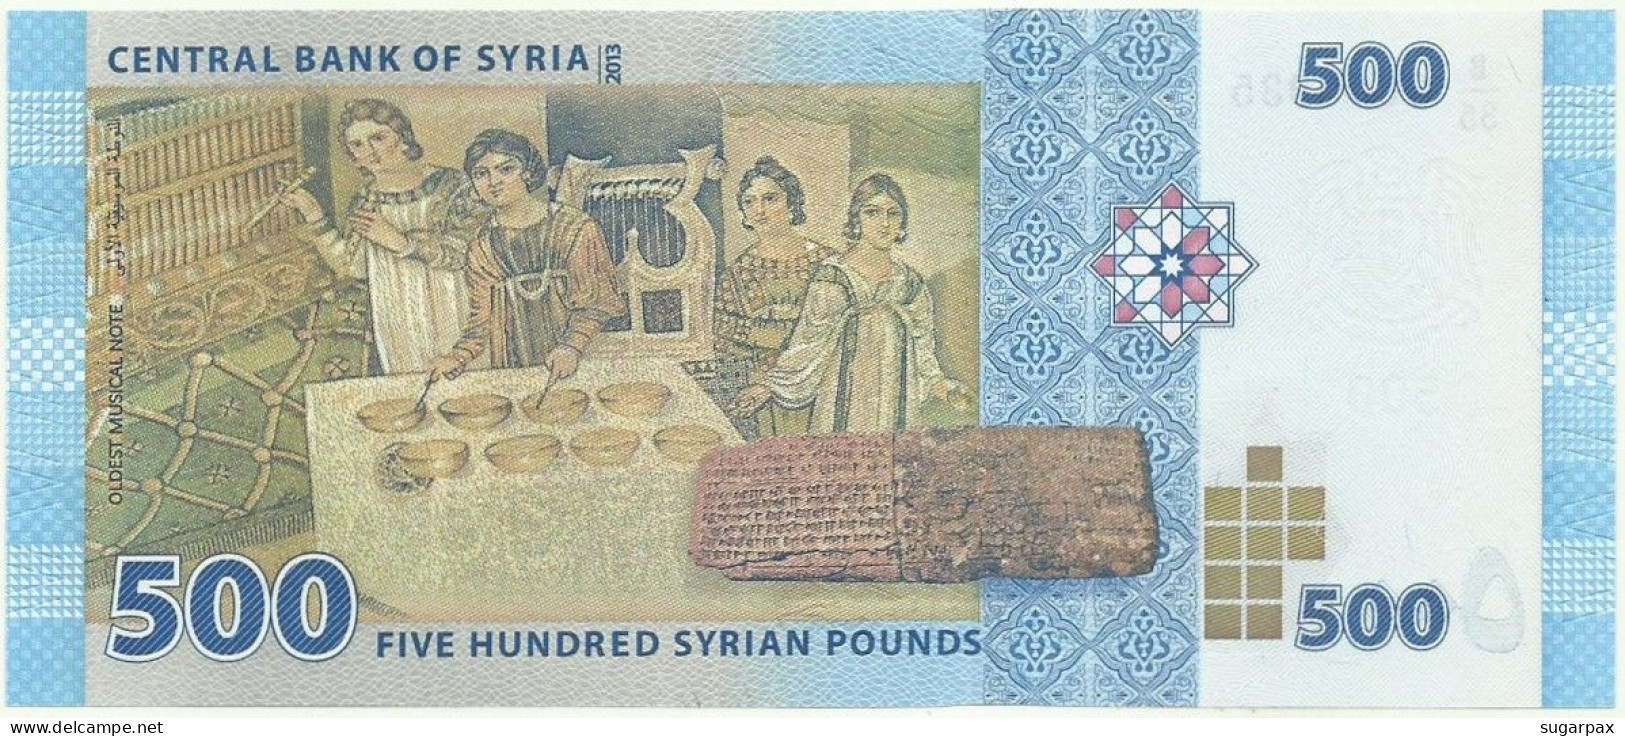 Syria - 500 Syrian Pounds - 2013 / AH 1434 - Pick 115 - Unc. - Serie B/35 - Syrie